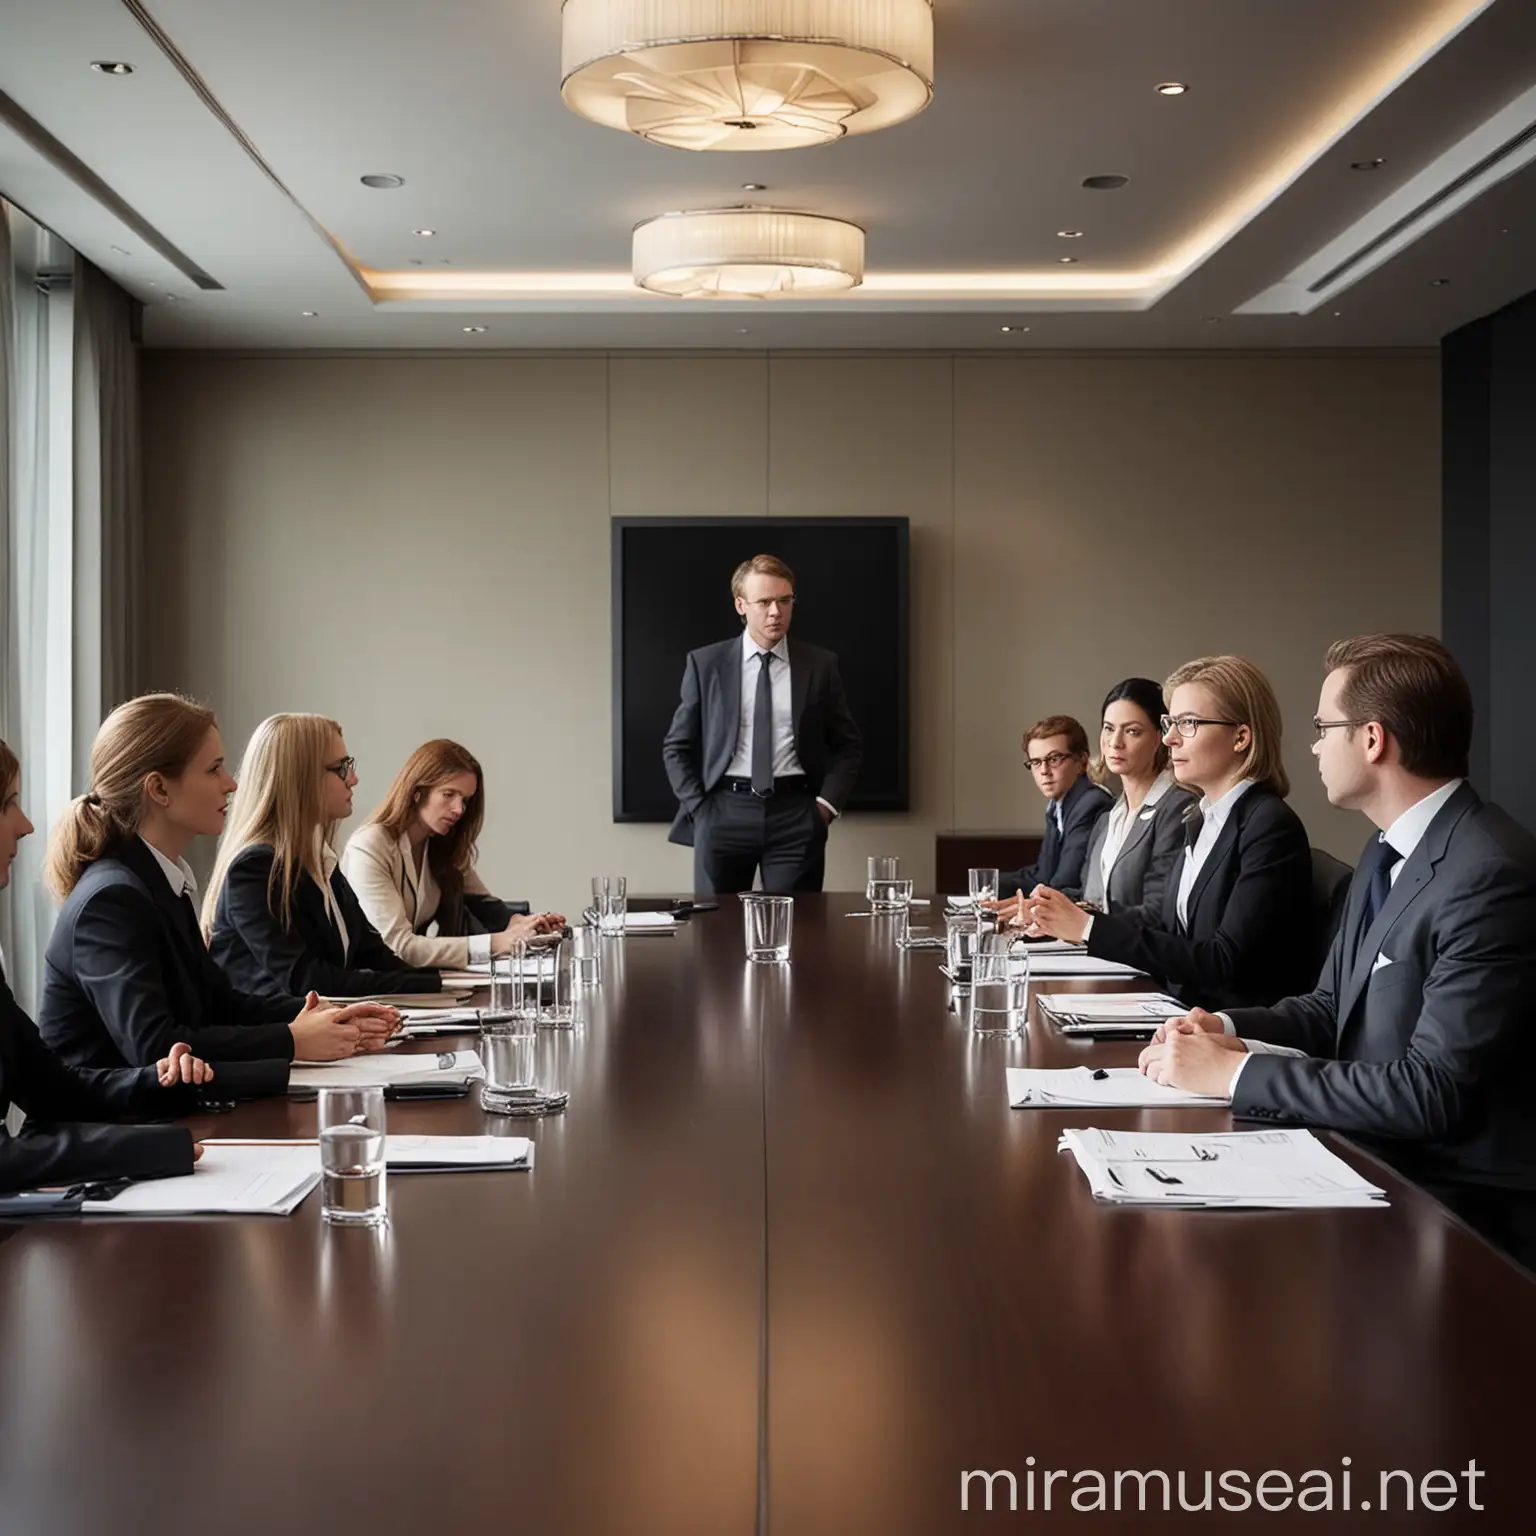 Depict a scene of seasoned professionals in an executive boardroom or a high-end corporate training facility. The participants should appear in formal business attire, interacting in a strategic workshop or seminar. The setting should be elegant and minimalistic, emphasizing the high stakes and advanced nature of their discussions.